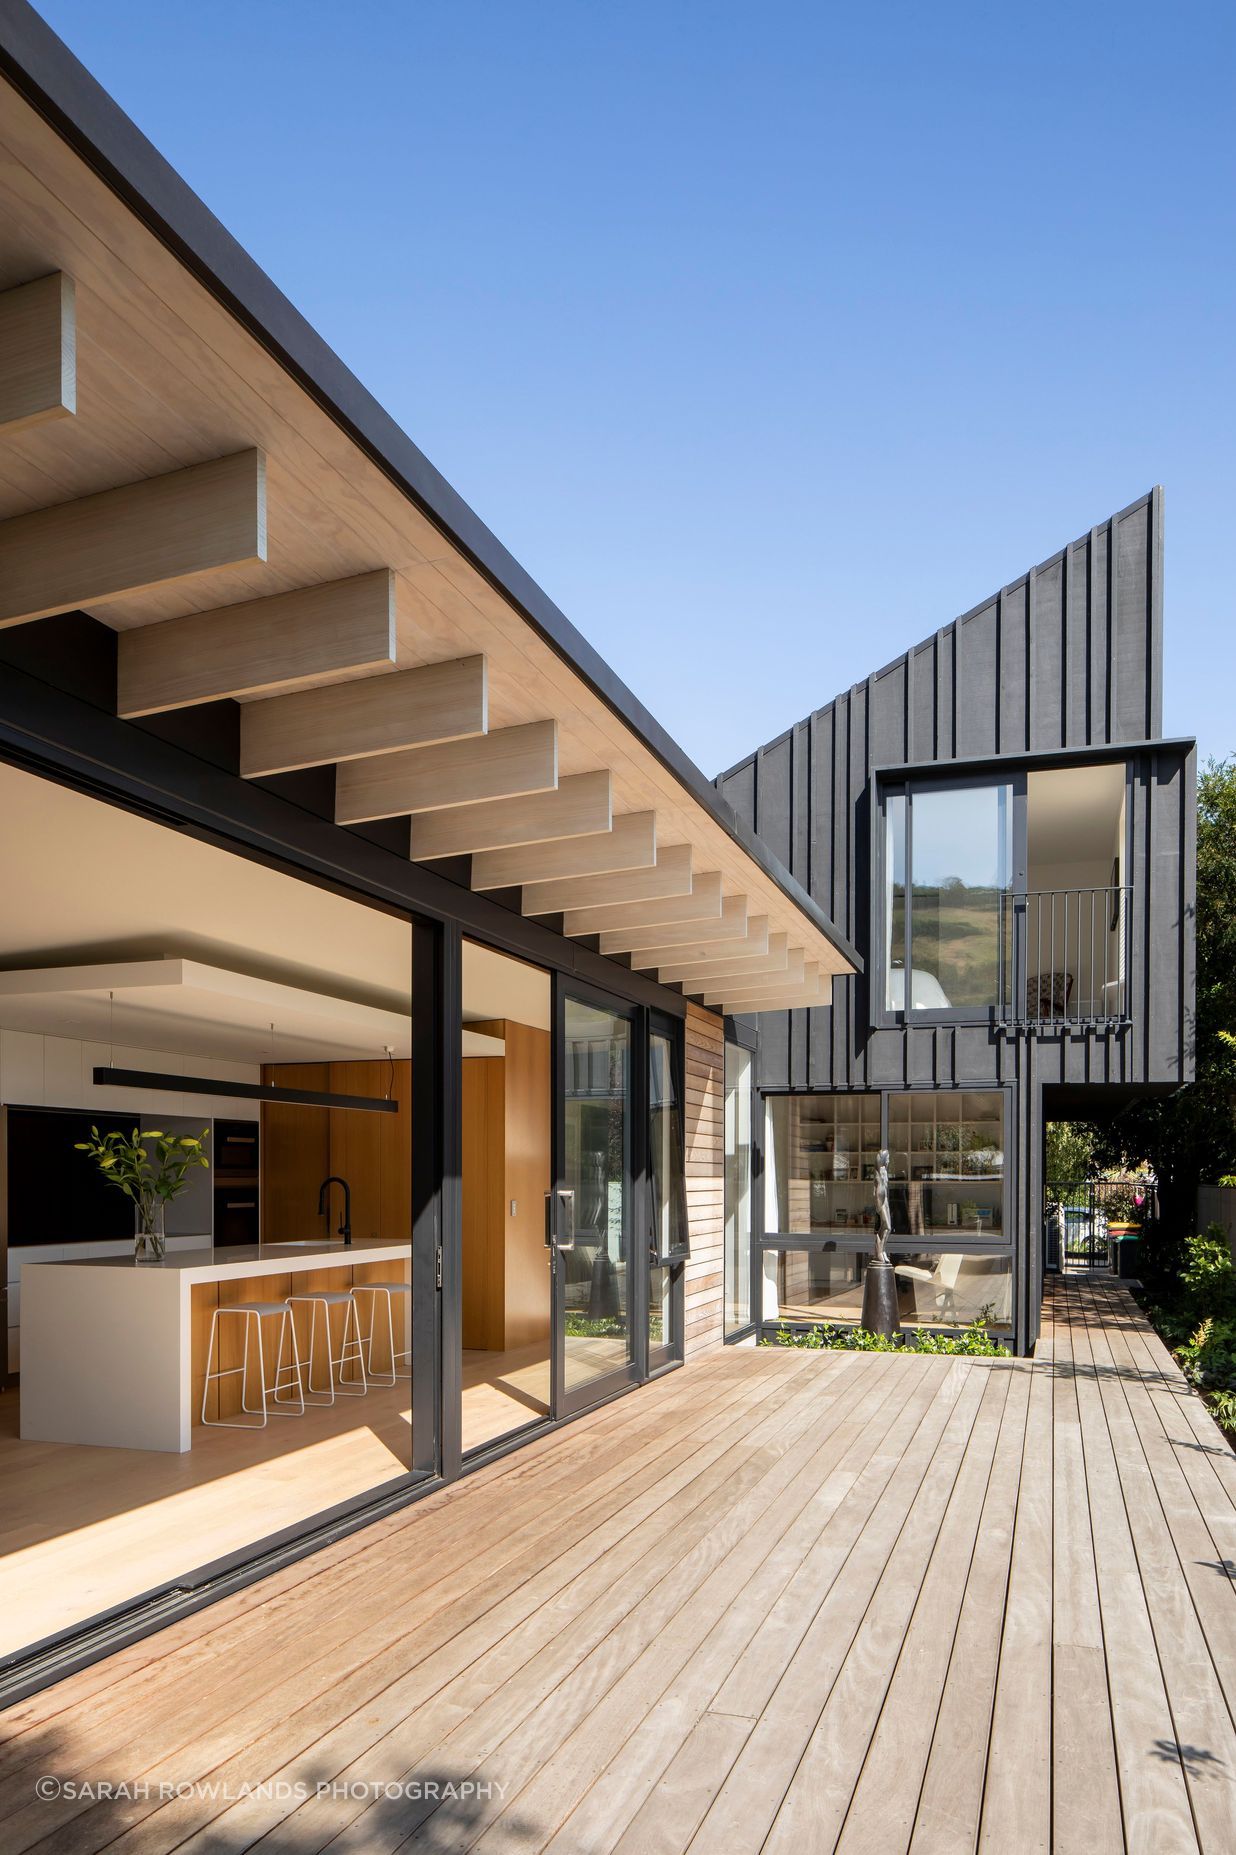 Thermally broken glazing and a generous eave overhang are two of the sustainble elements built into the house.